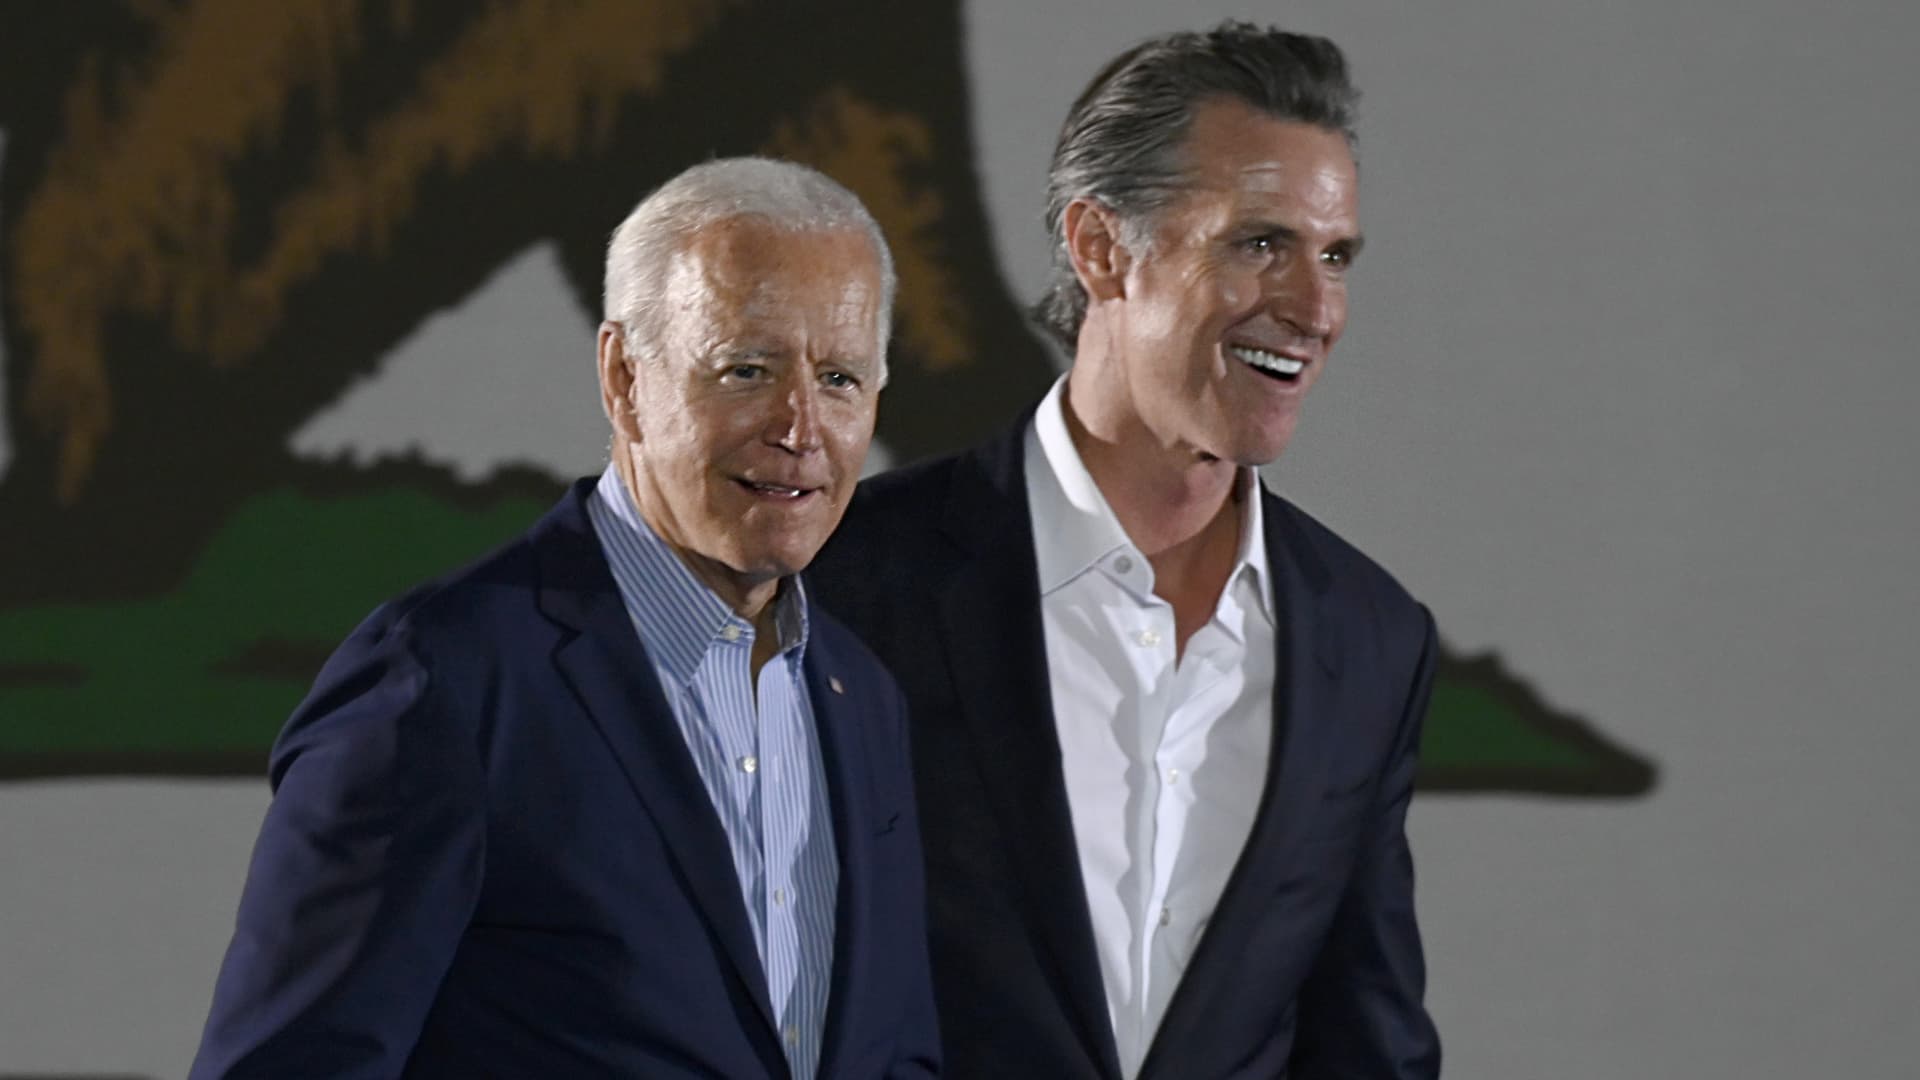 President Joe Biden and Governor Gavin Newsom enter the stage at Long Beach City College on the final day of campaigning against the recall in Long Beach on Sunday, August 1, 2021.